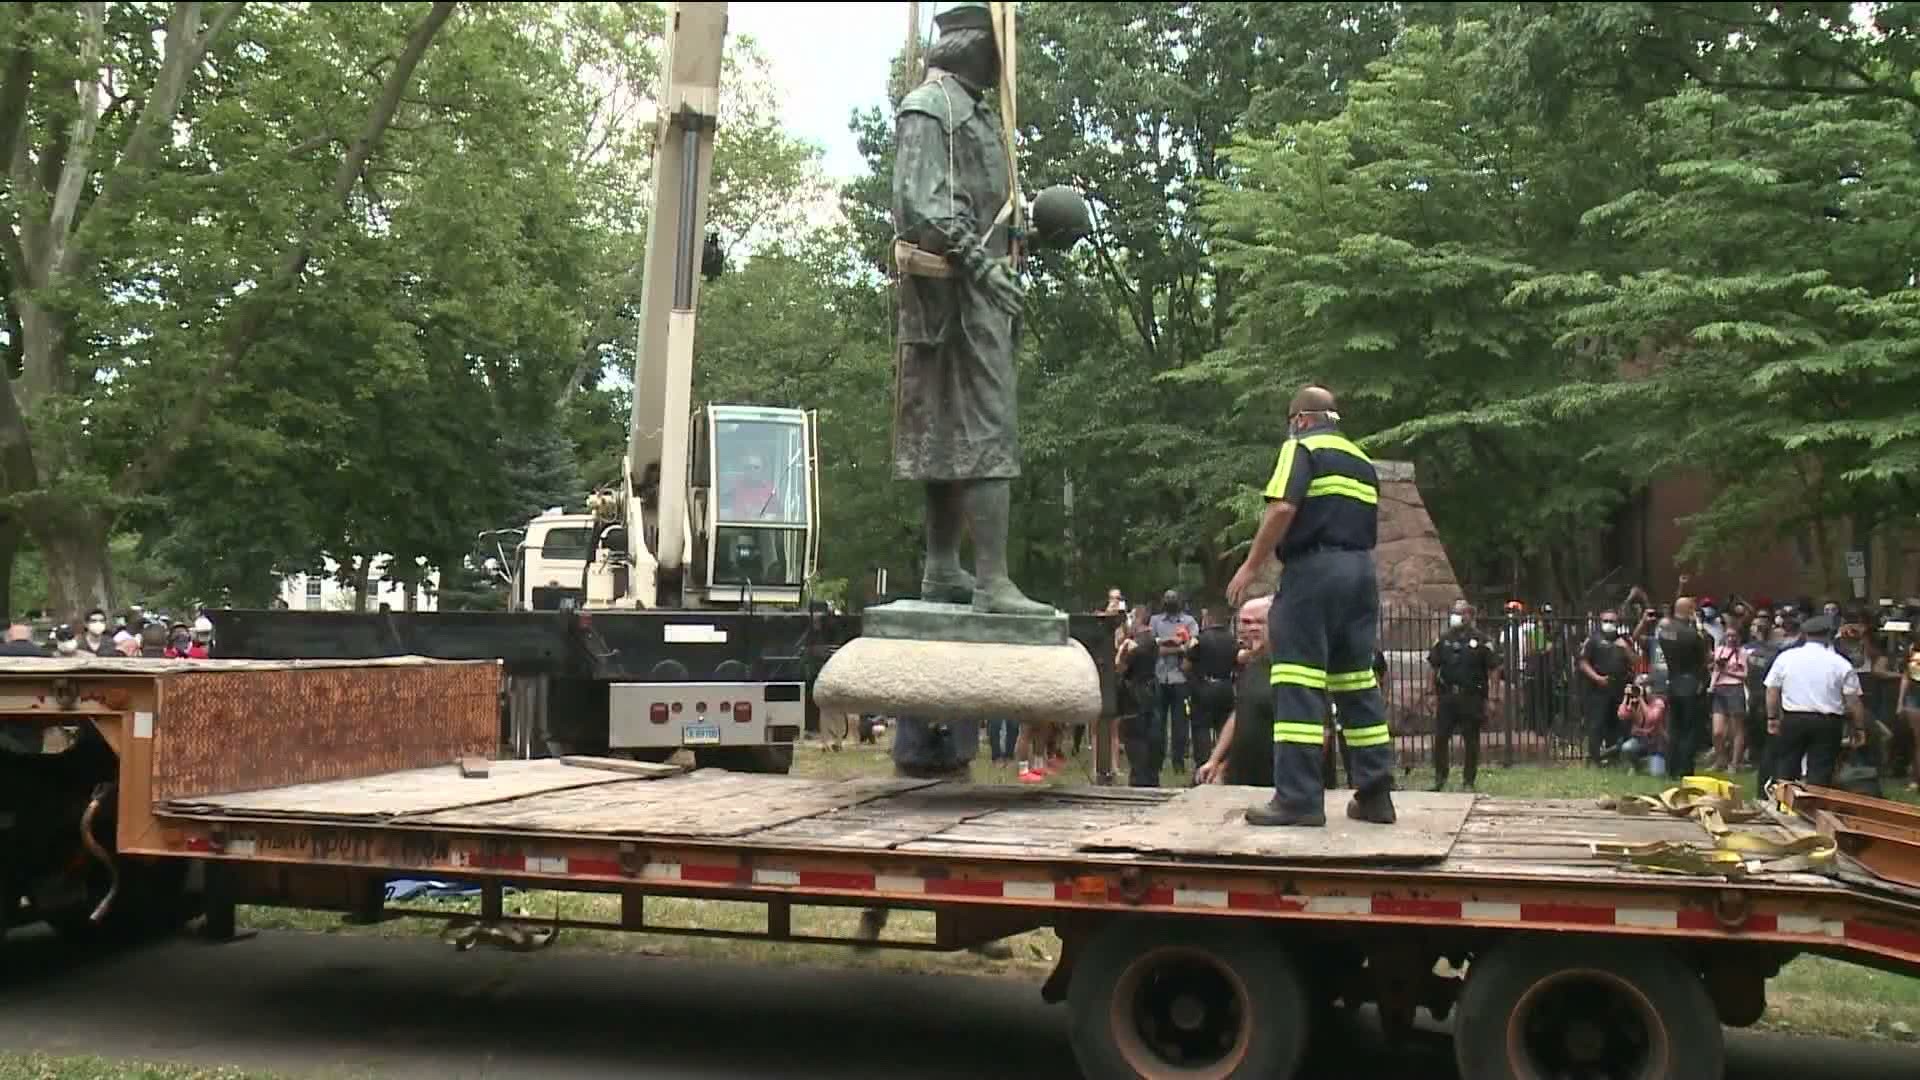 The statue was removed in June as controversy grew over its presence, and after it was vandalized